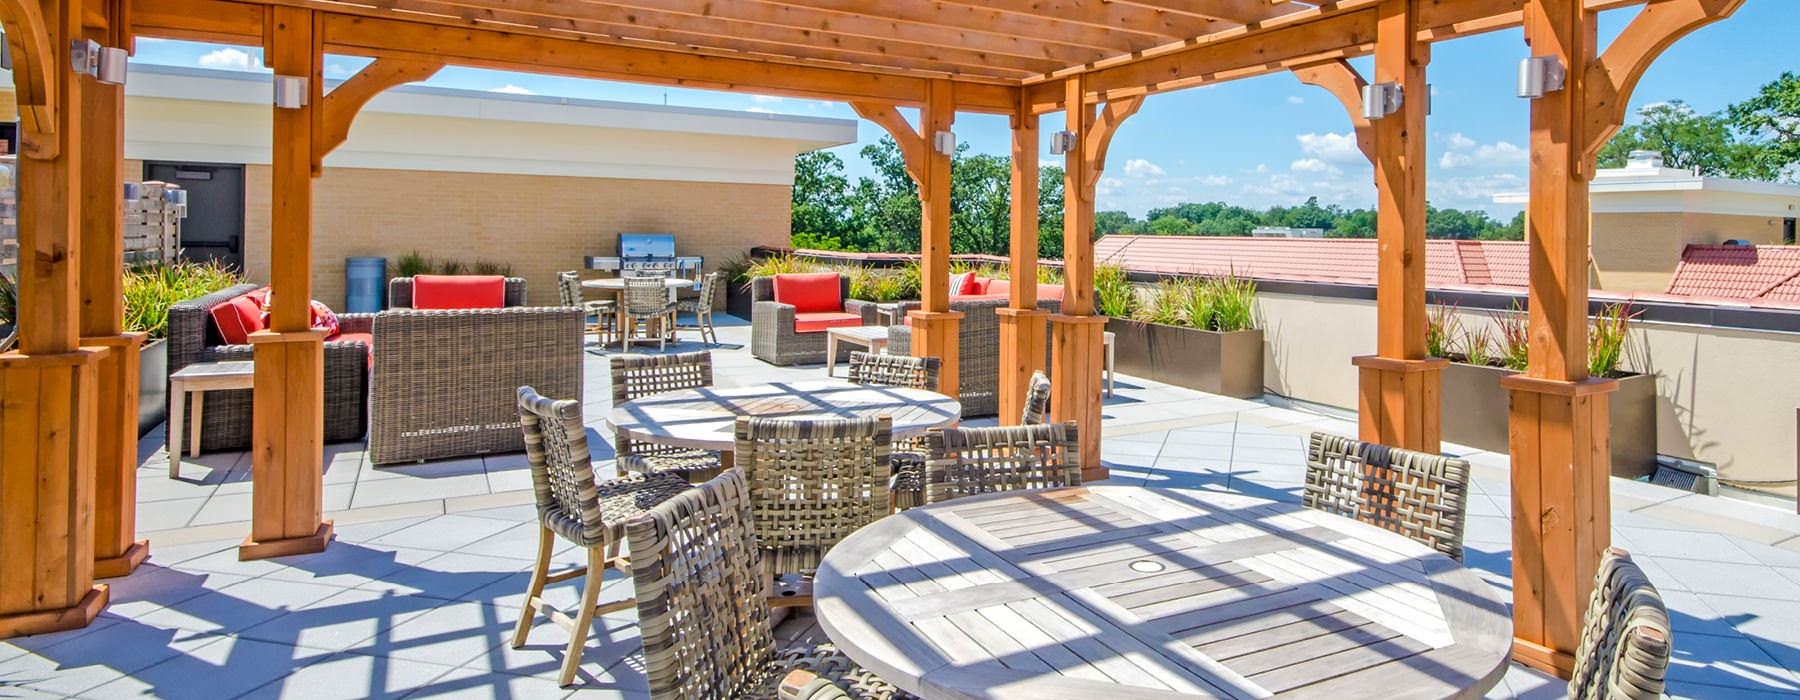 pergola covered eating area on rooftop terrace